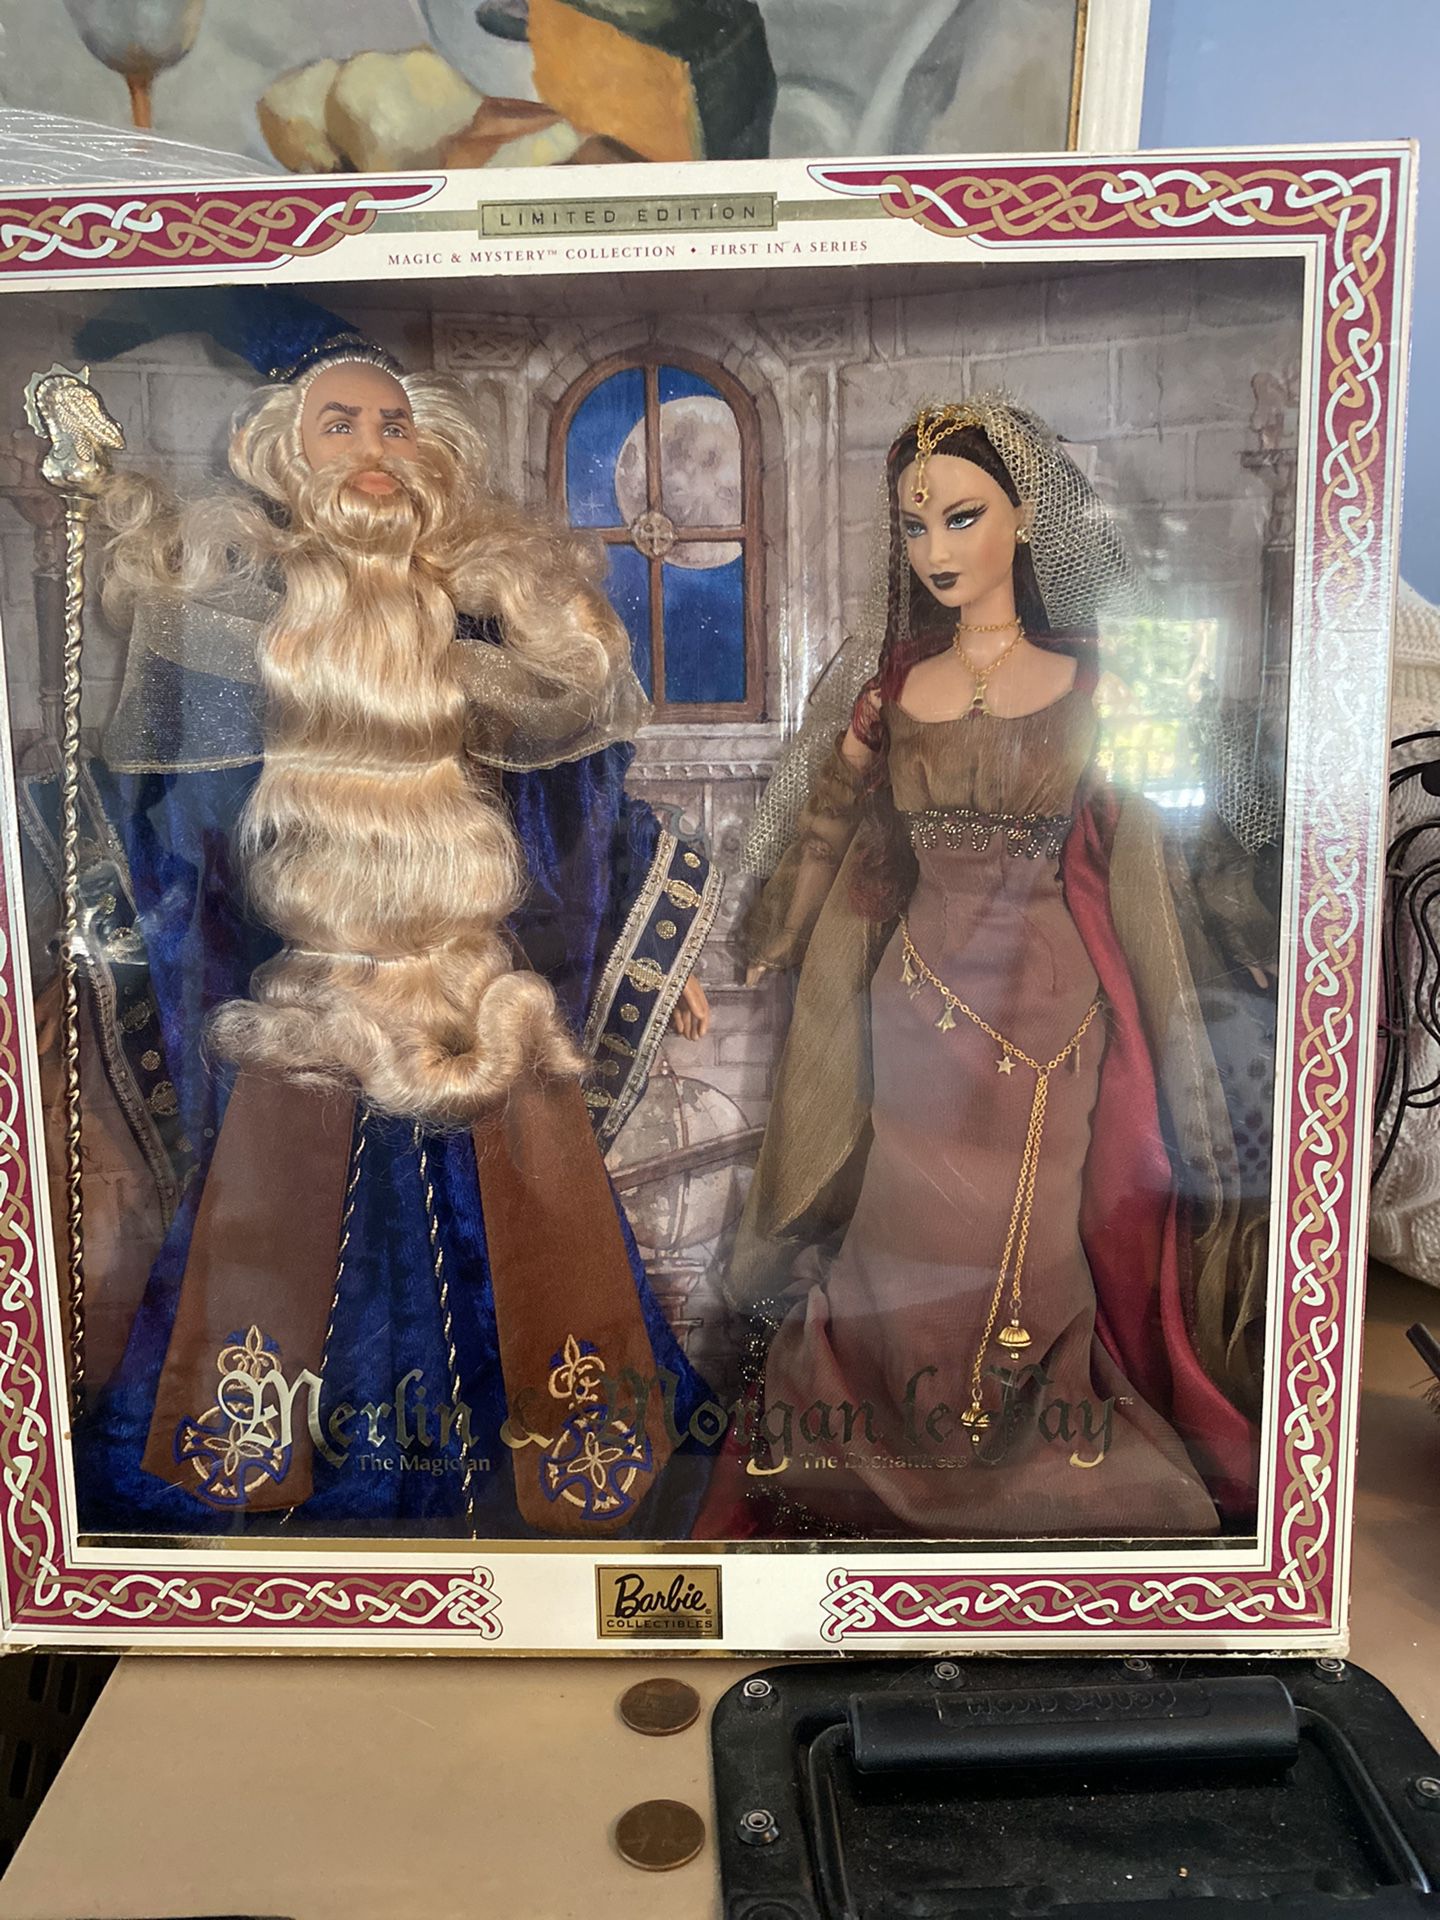 Merlin and Morgan Le Fay Barbie collectibles